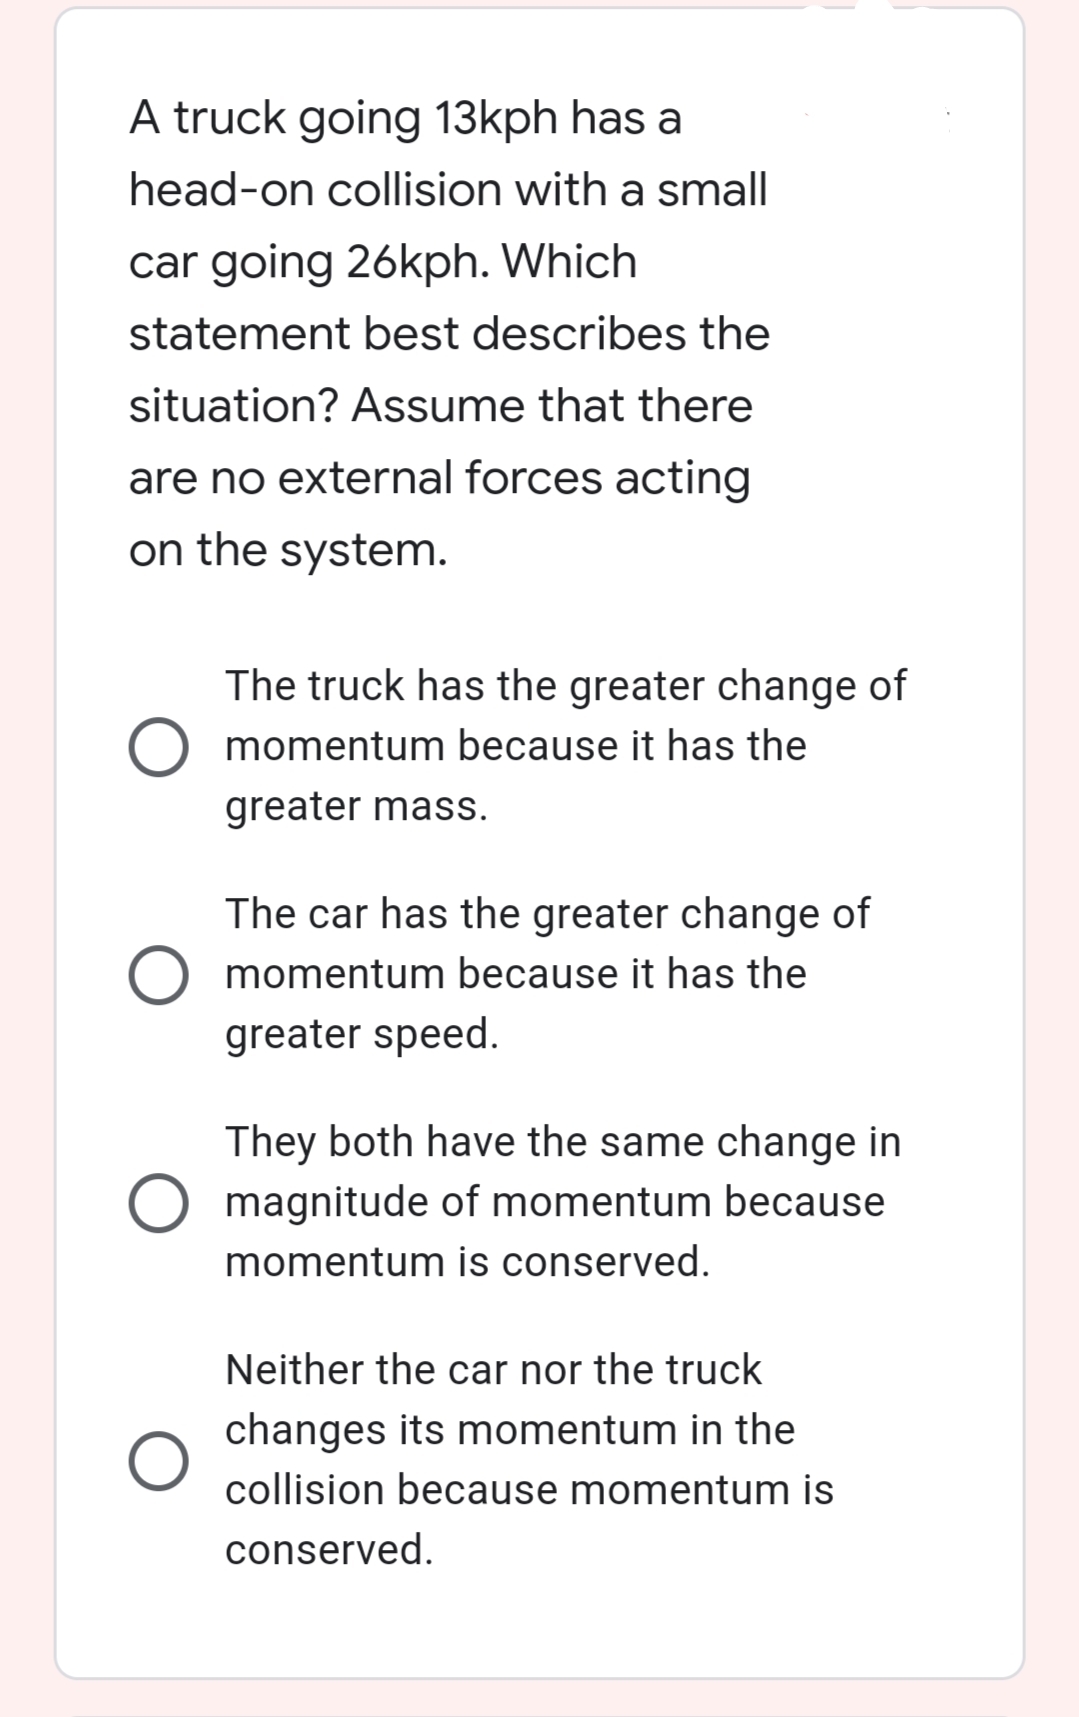 A truck going 13kph has a
head-on collision with a small
car going 26kph. Which
statement best describes the
situation? Assume that there
are no external forces acting
on the system.
The truck has the greater change of
momentum because it has the
greater mass.
The car has the greater change of
momentum because it has the
greater speed.
They both have the same change in
O magnitude of momentum because
momentum is conserved.
Neither the car nor the truck
changes its momentum in the
collision because momentum is
conserved.